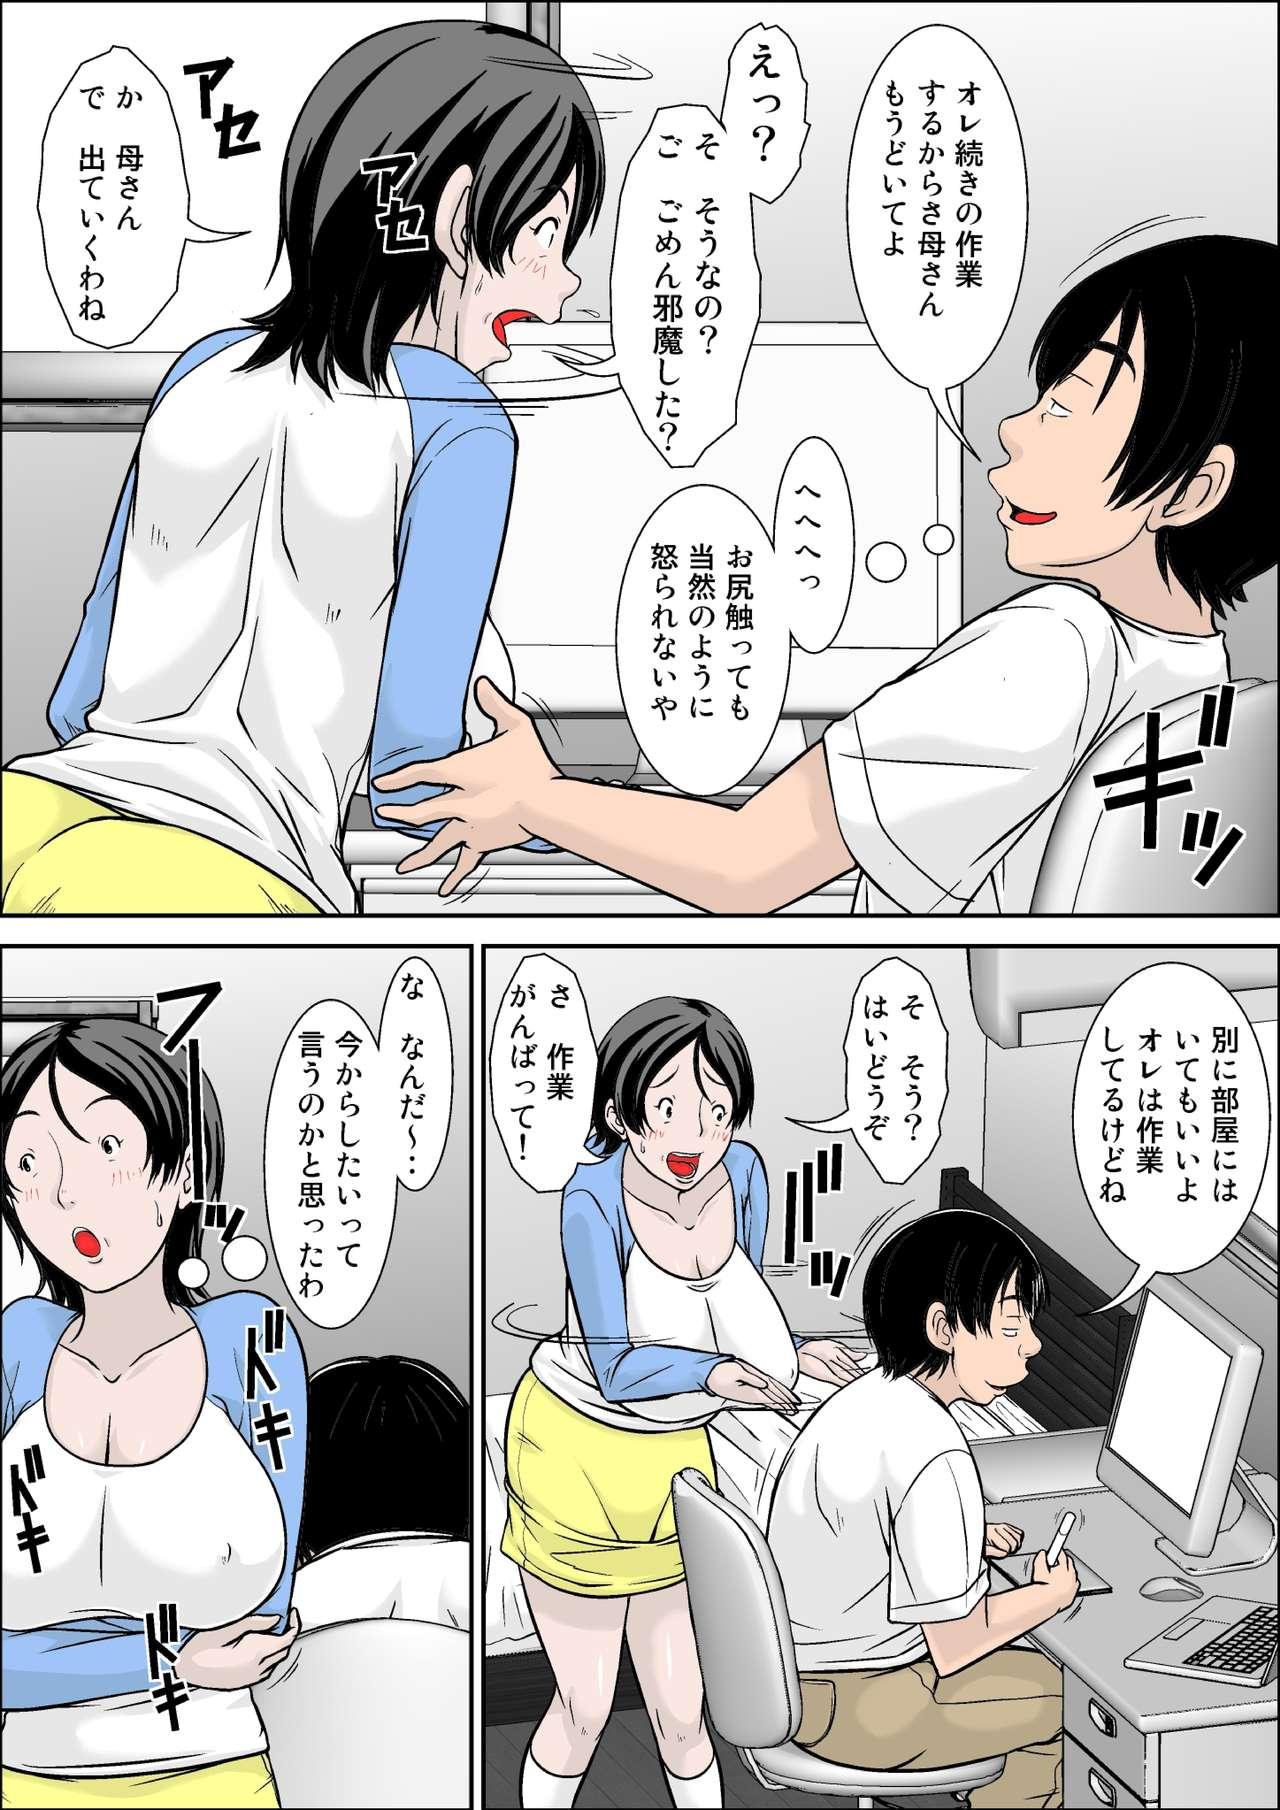 Hey! It is said that I urge you mother and will do what! ... mother Hatsujou - 1st part 6